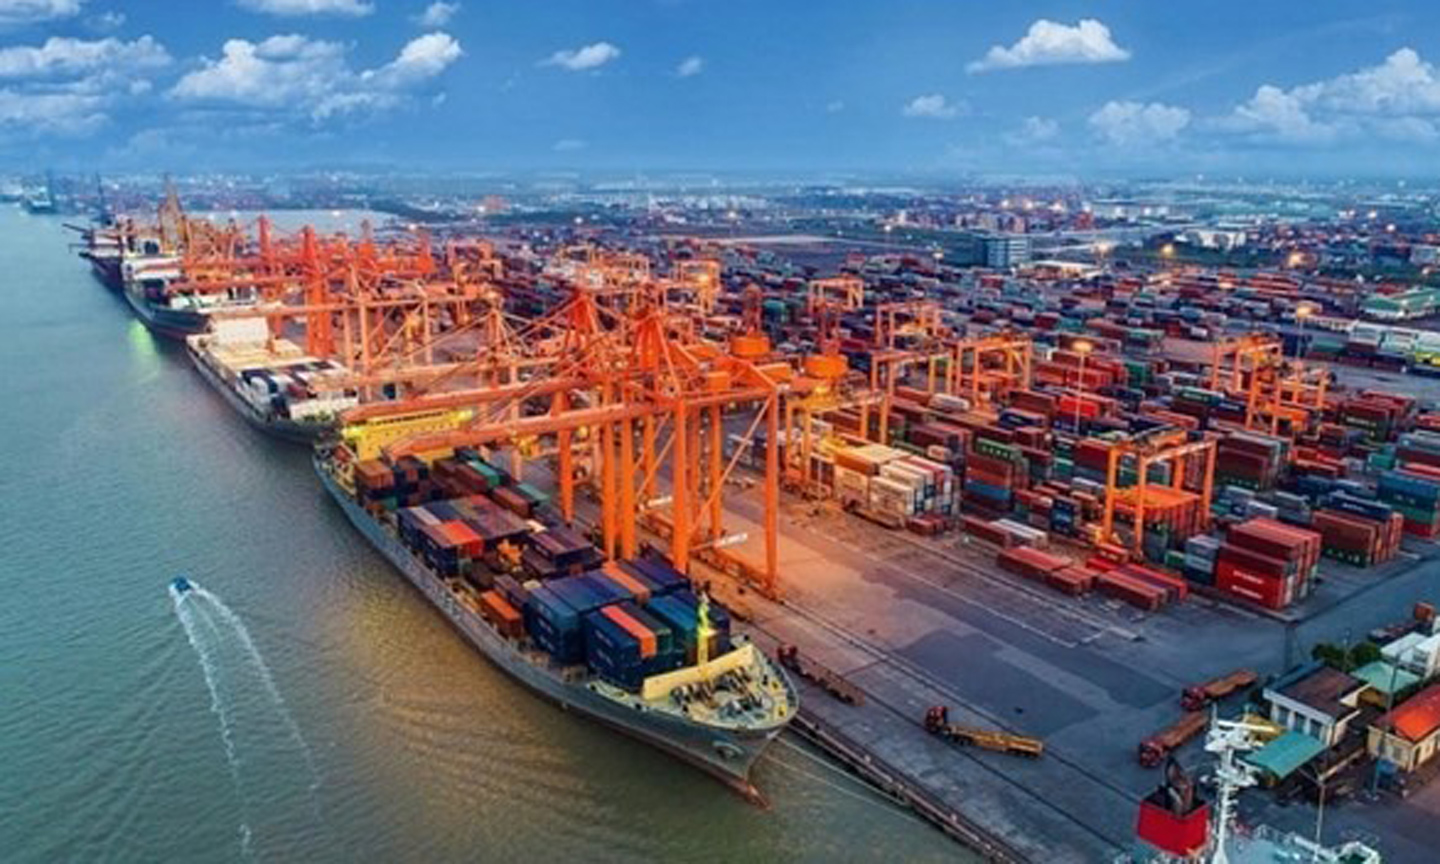 ABO/NDO- Vietnam’s import-export value in the first five months of this year was estimated at 262.54 billion USD, down 14.7% year-on-year, with a trade surplus of 9.8 billion USD, the General Statistics Office (GSO) announced on May 29.